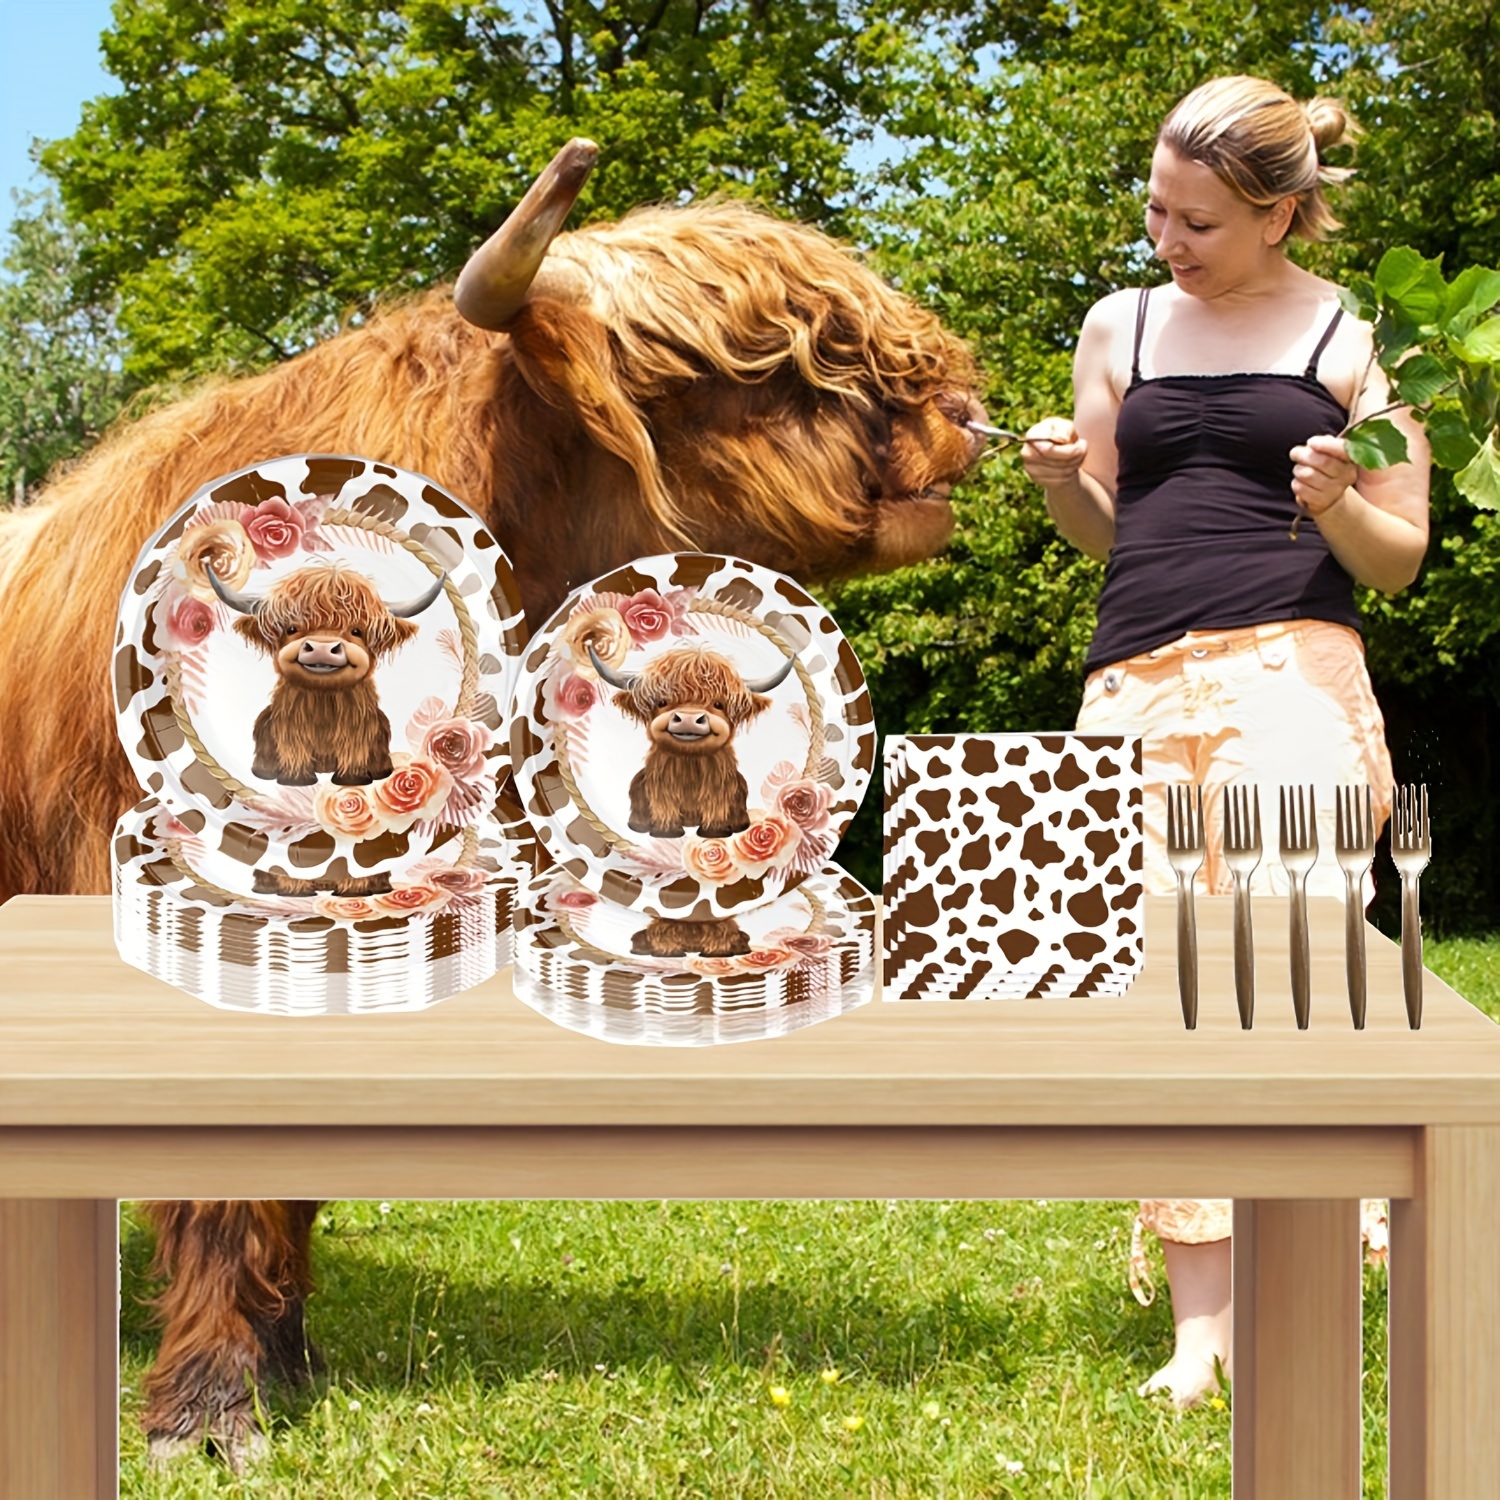 

80pcs Highland Cow Party Supplies - Serve For 20 Guests With Brown Cow Plates, Napkins, Forks - Highland Cattle Dinnerware Decorations Ideal For Western Farm Animals Themed Birthday Parties